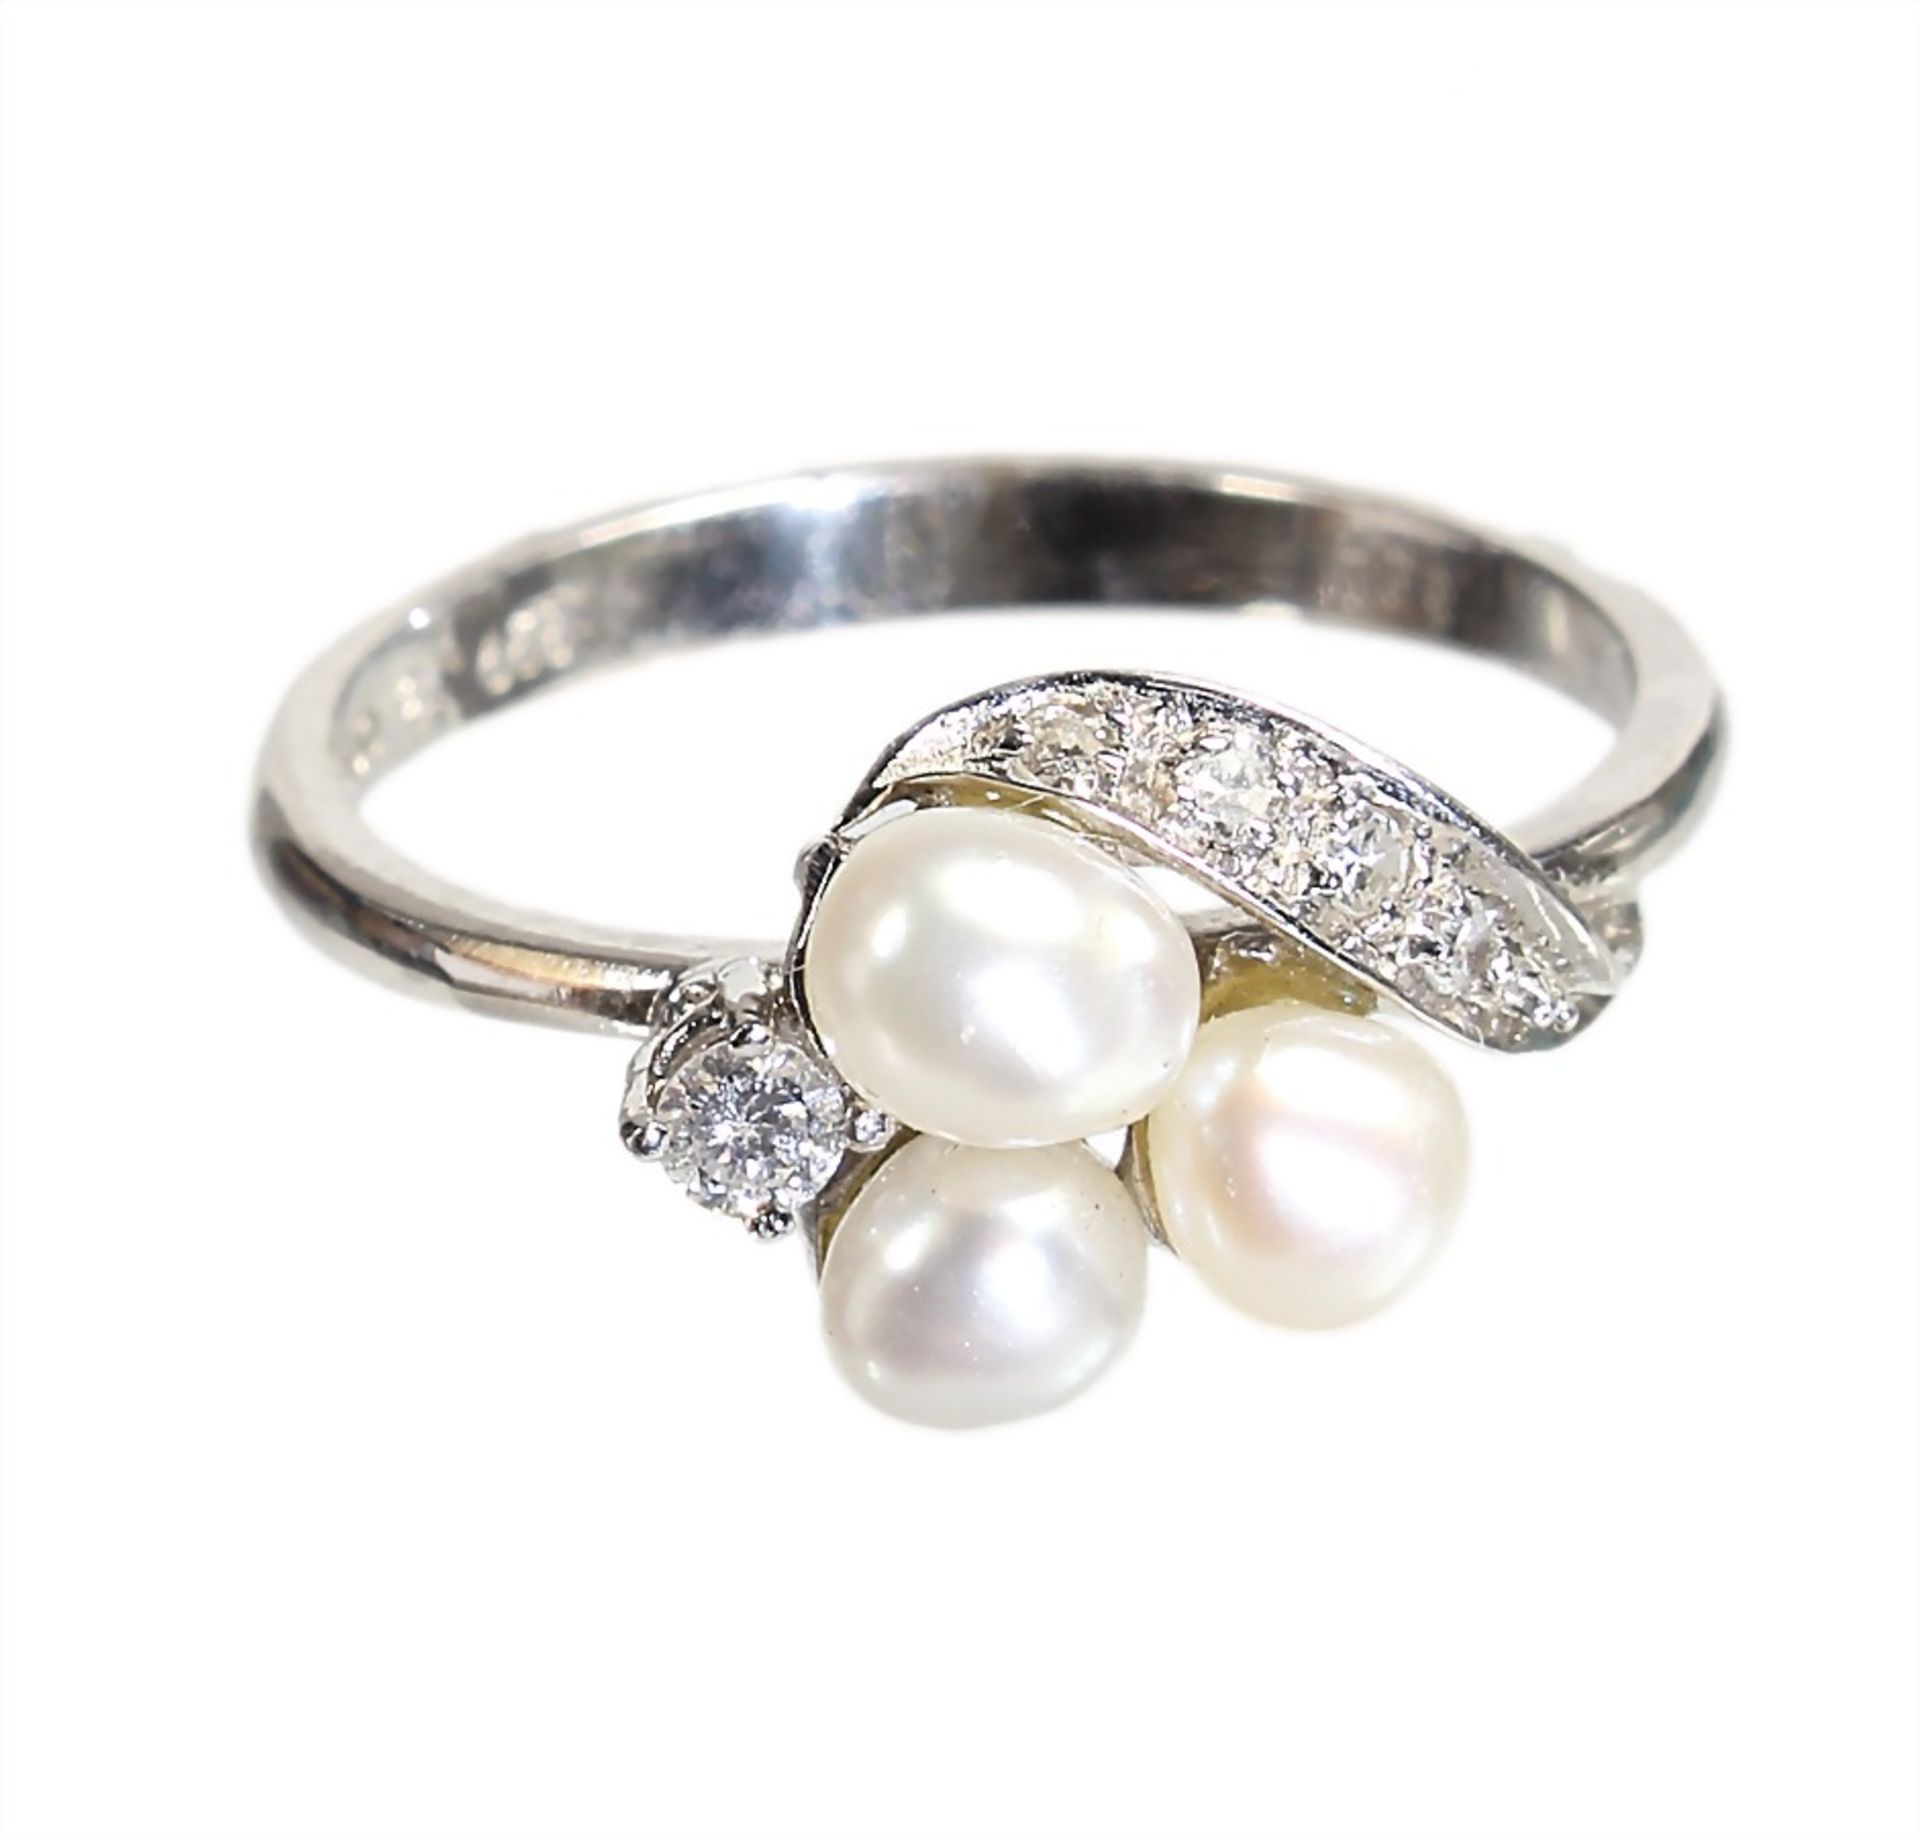 ring, white gold 585/000, 1 brilliants, 4 pieces 8/8 diamonds c. 0.09 ct white, 3 freshwater pearls,